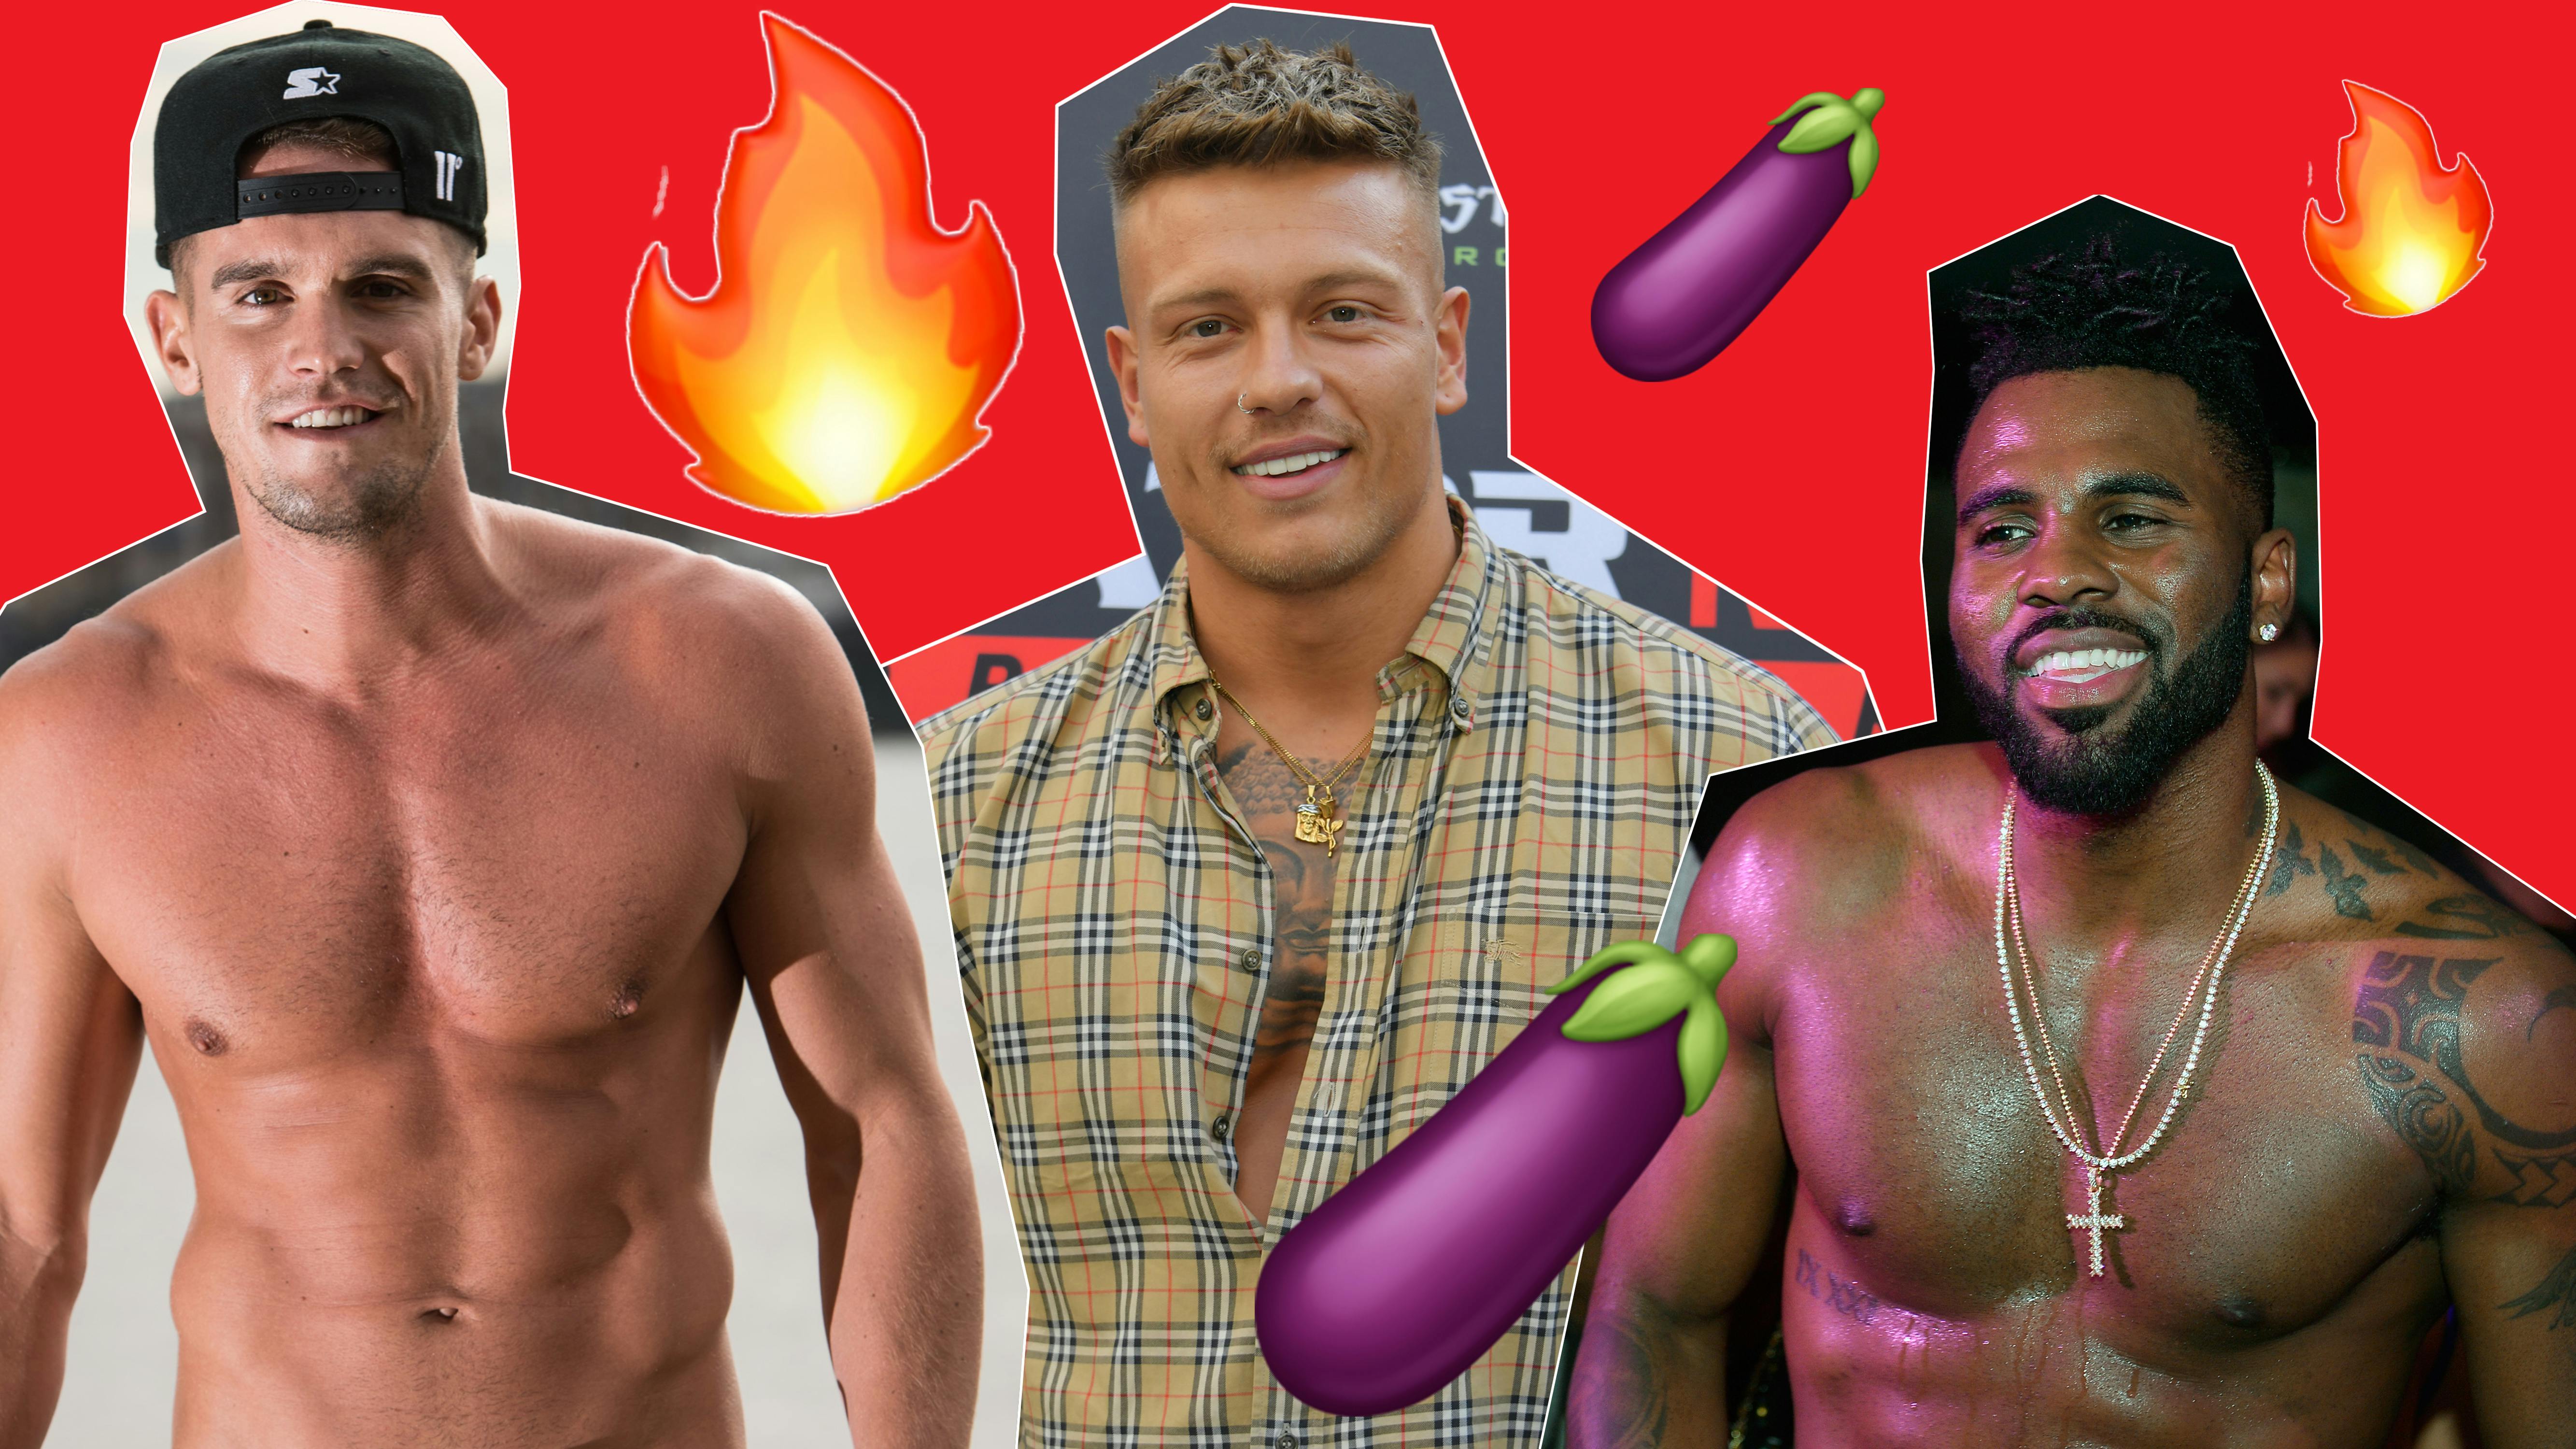 alex nowlin recommends Celebrities With Huge Dicks